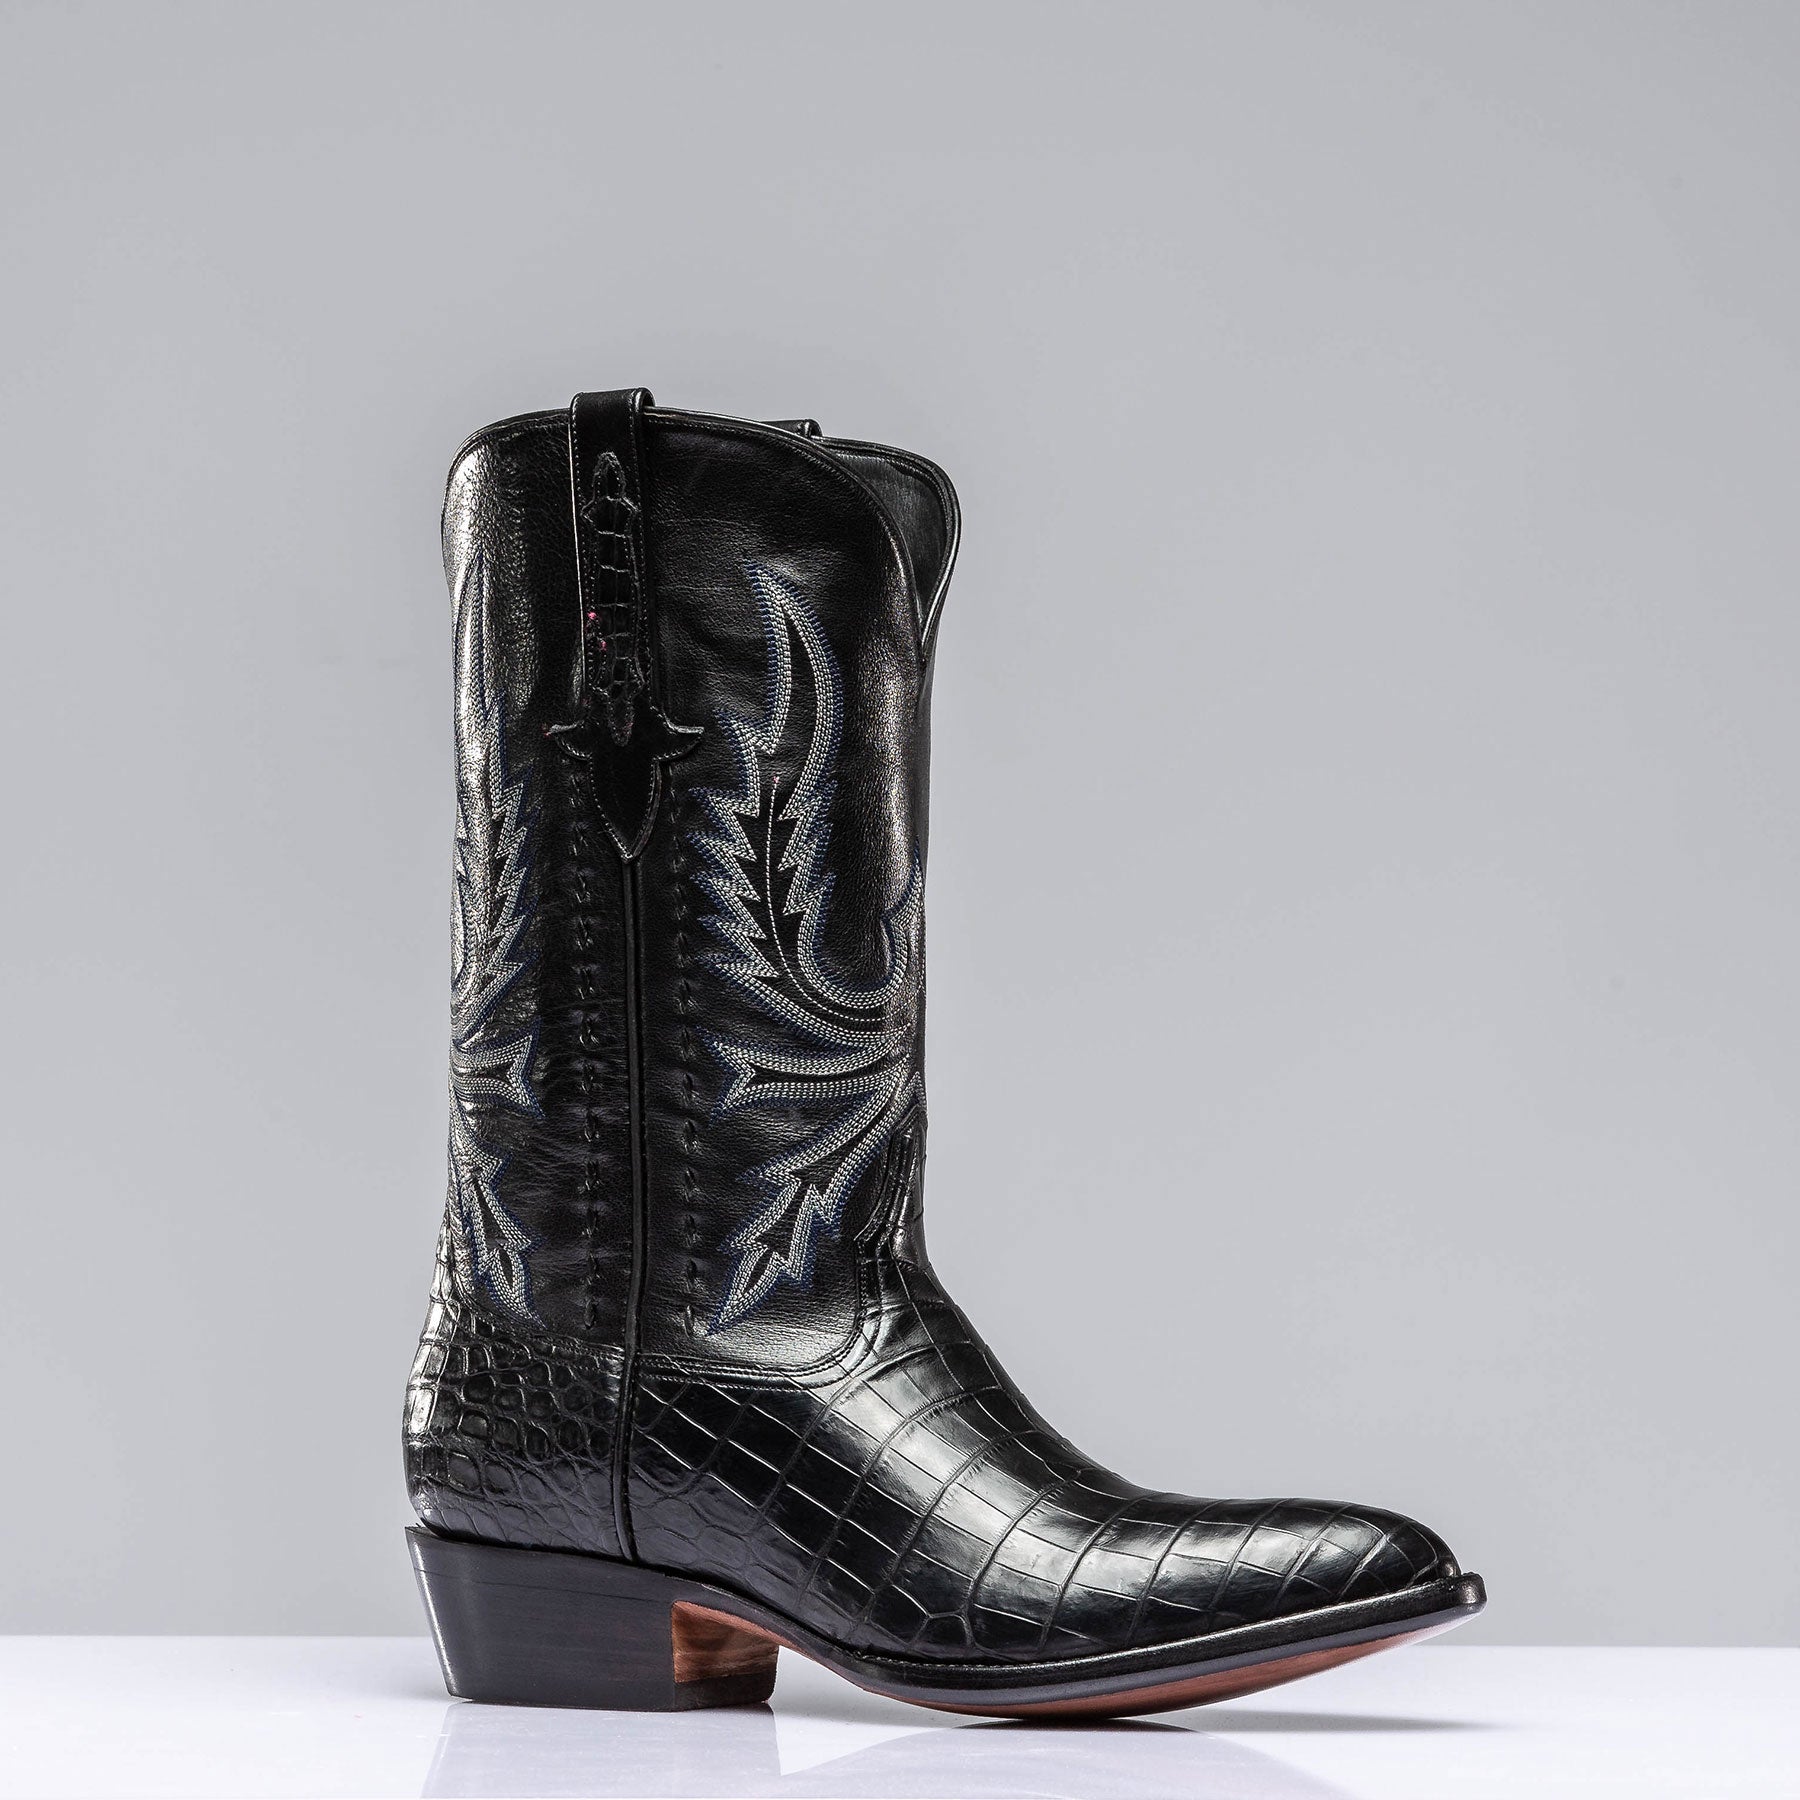 Crocodile Belly Cowboy Boot | Mens - Cowboy Boots | Stallion Boots